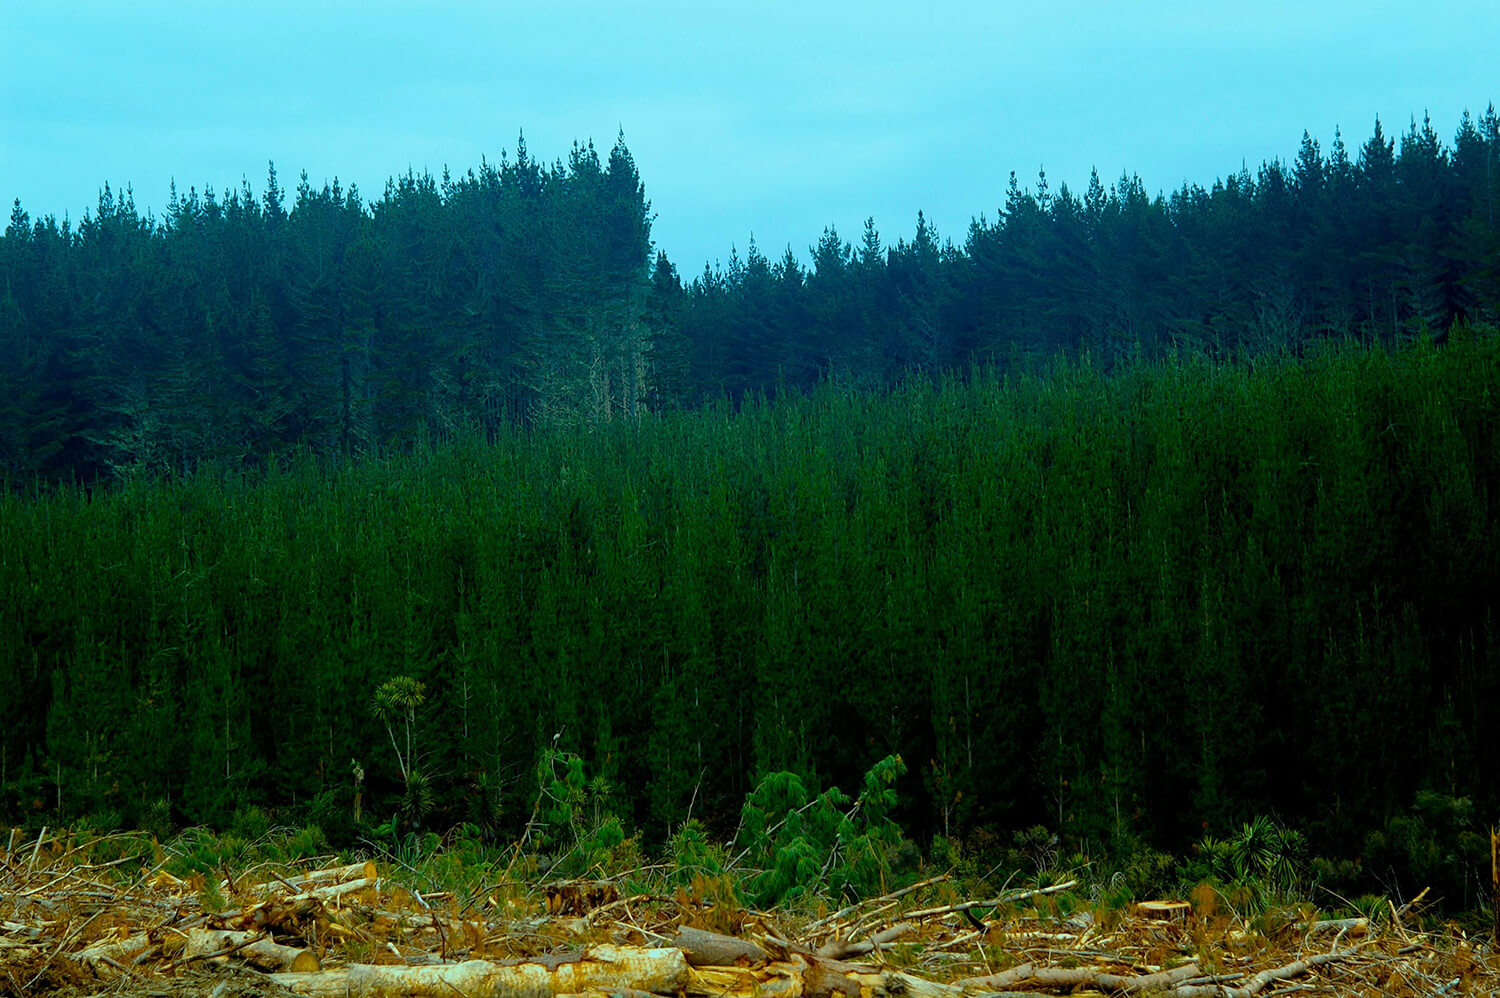 New Zealand’s foresters should not be punished for managing their forests sustainably